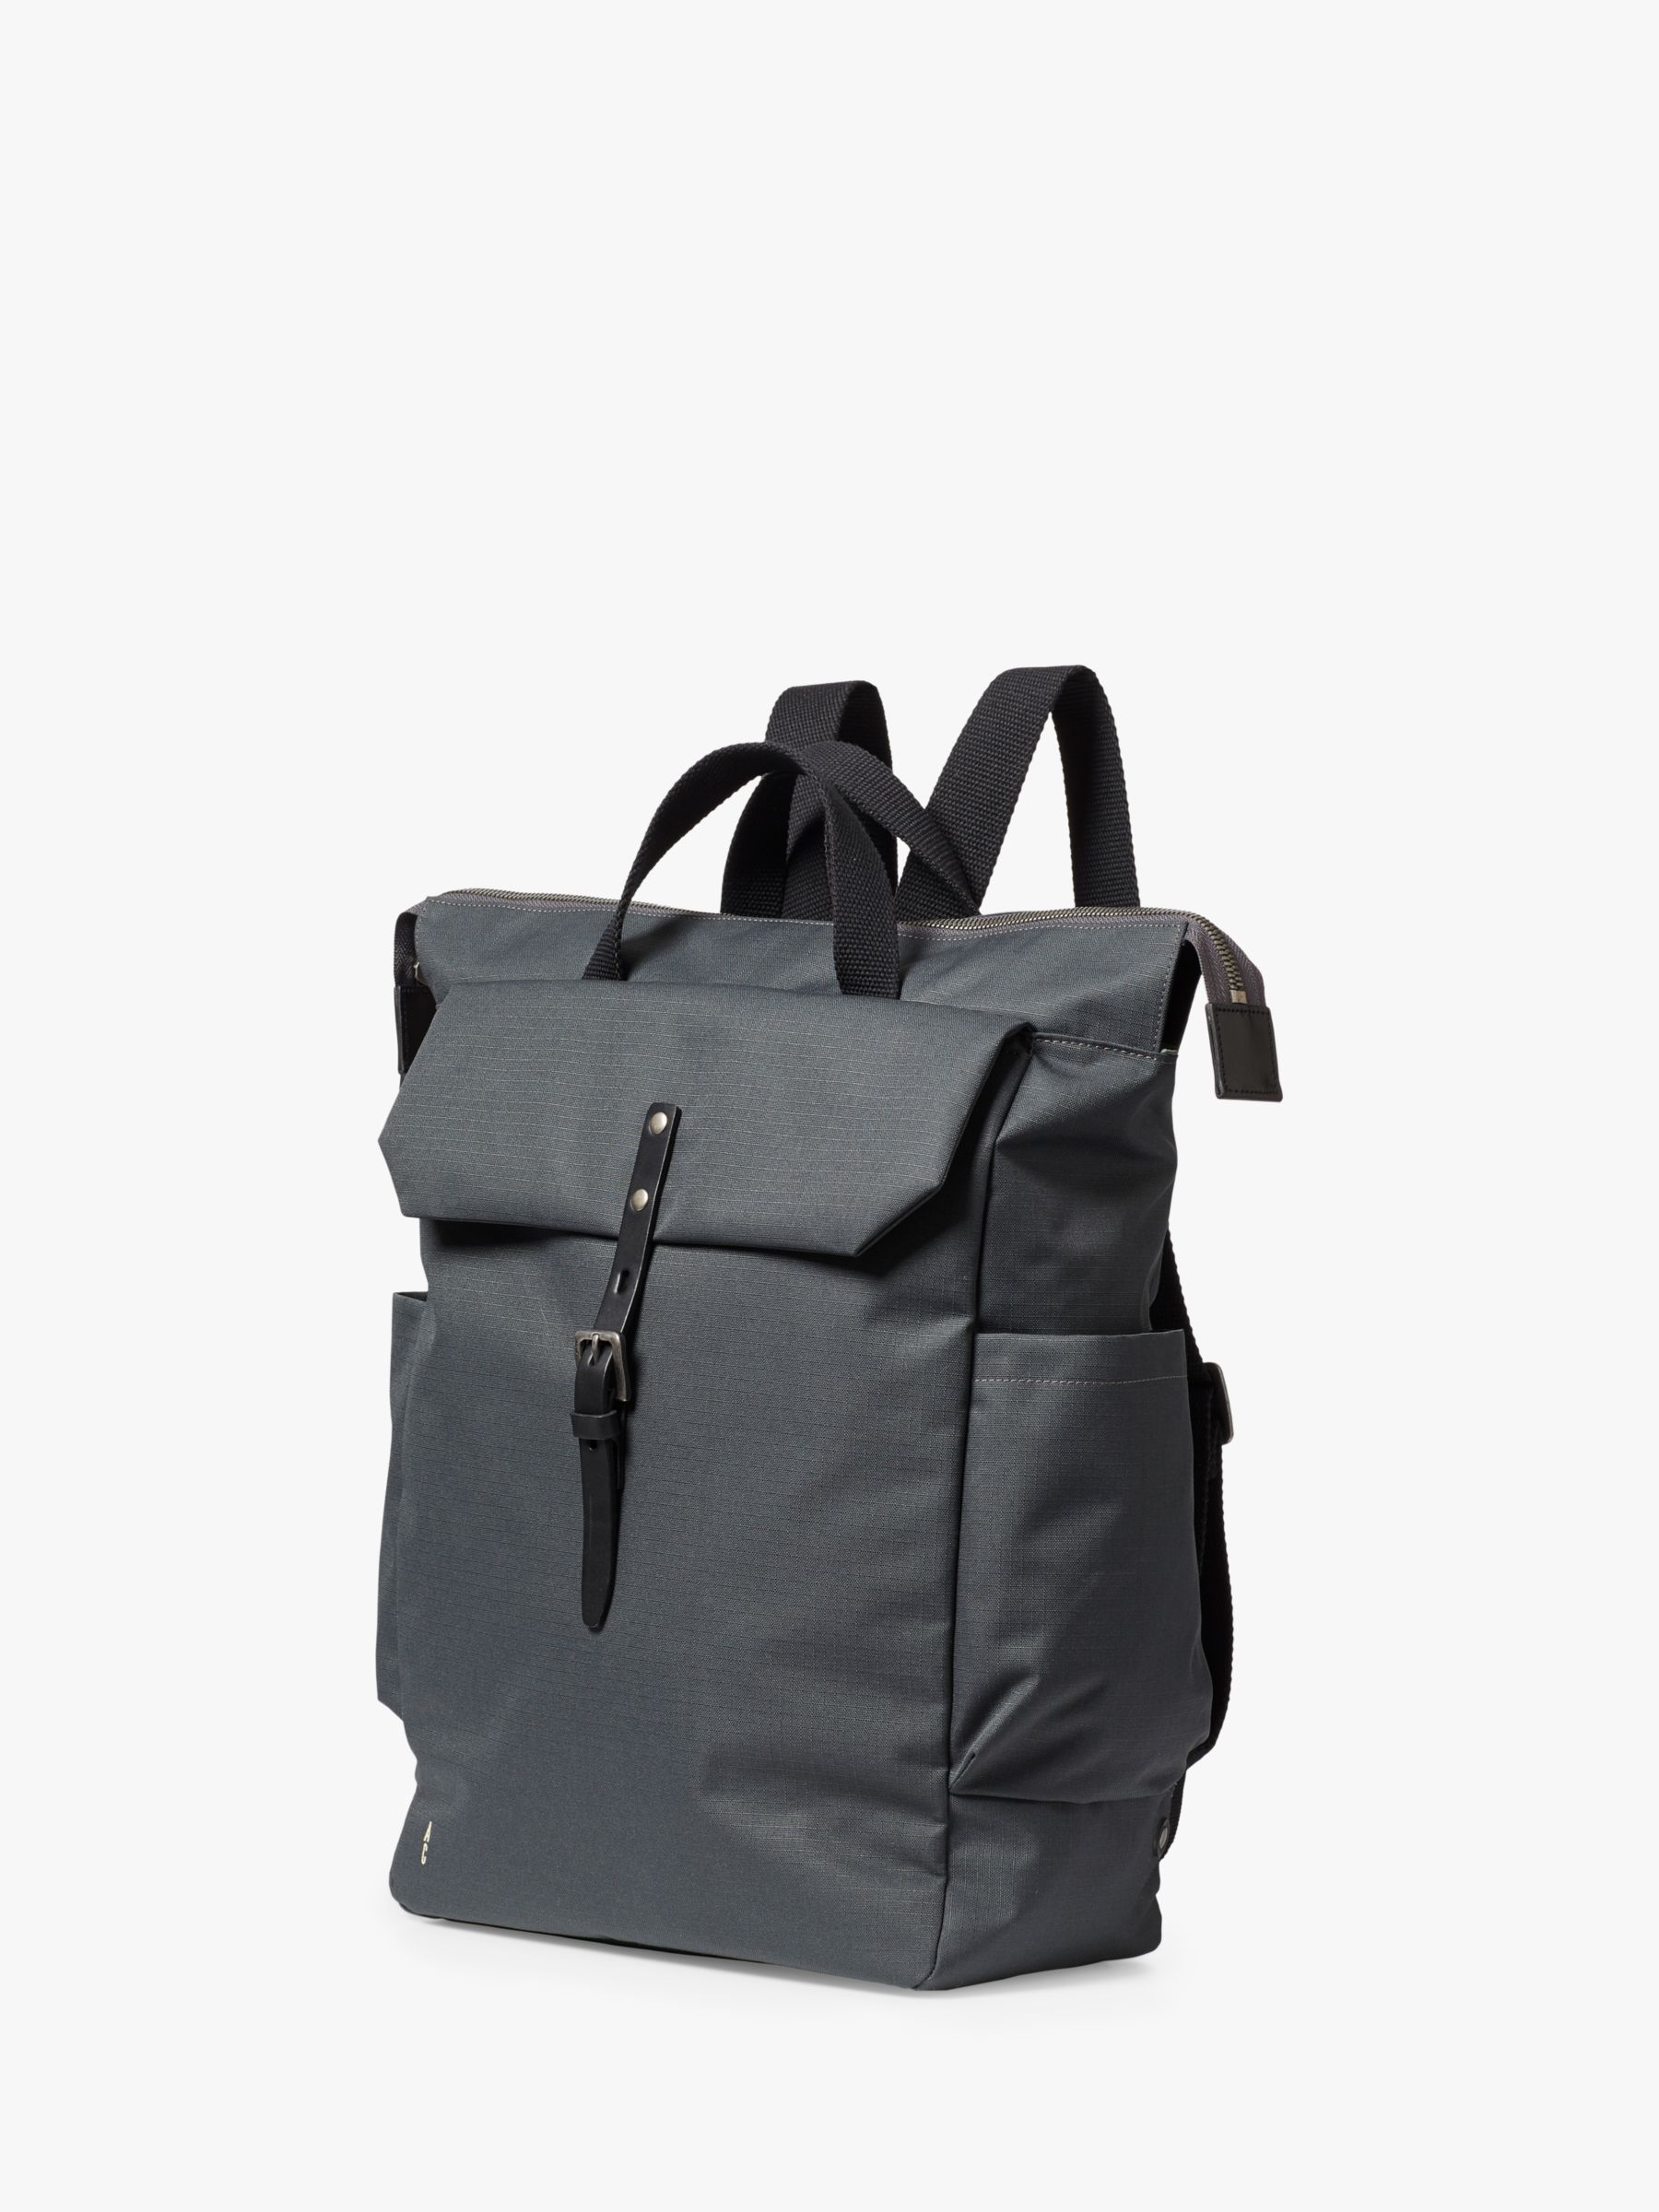 Buy Ally Capellino Fin Waxed Cotton Rucksack Online at johnlewis.com